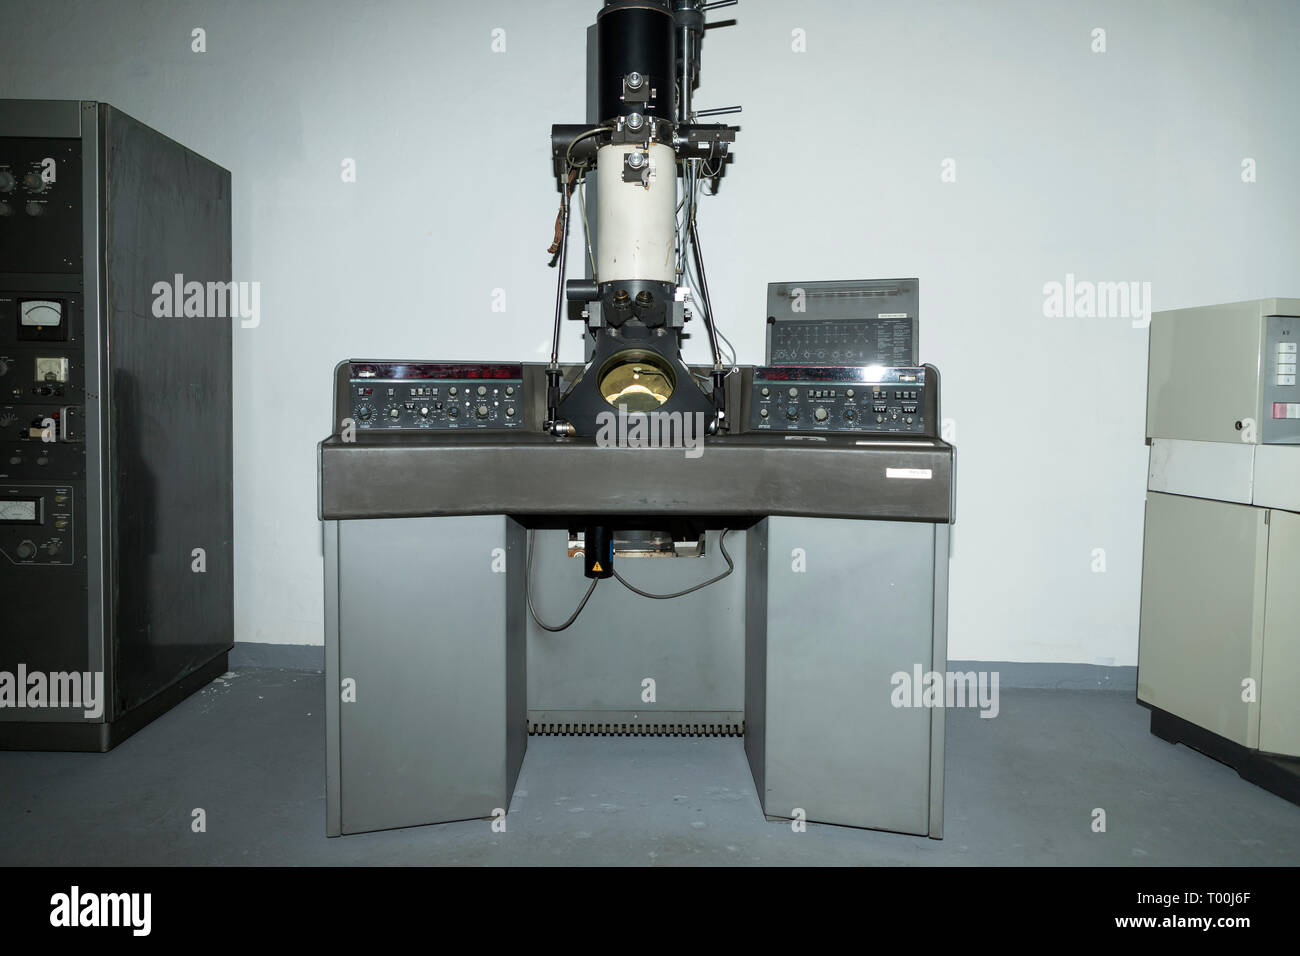 Belgrade, Serbia, March 01, 2019: Transmission Electron Microscope EM 400 made by Philips (1975) exposed in the Museum of Science and Technology Stock Photo